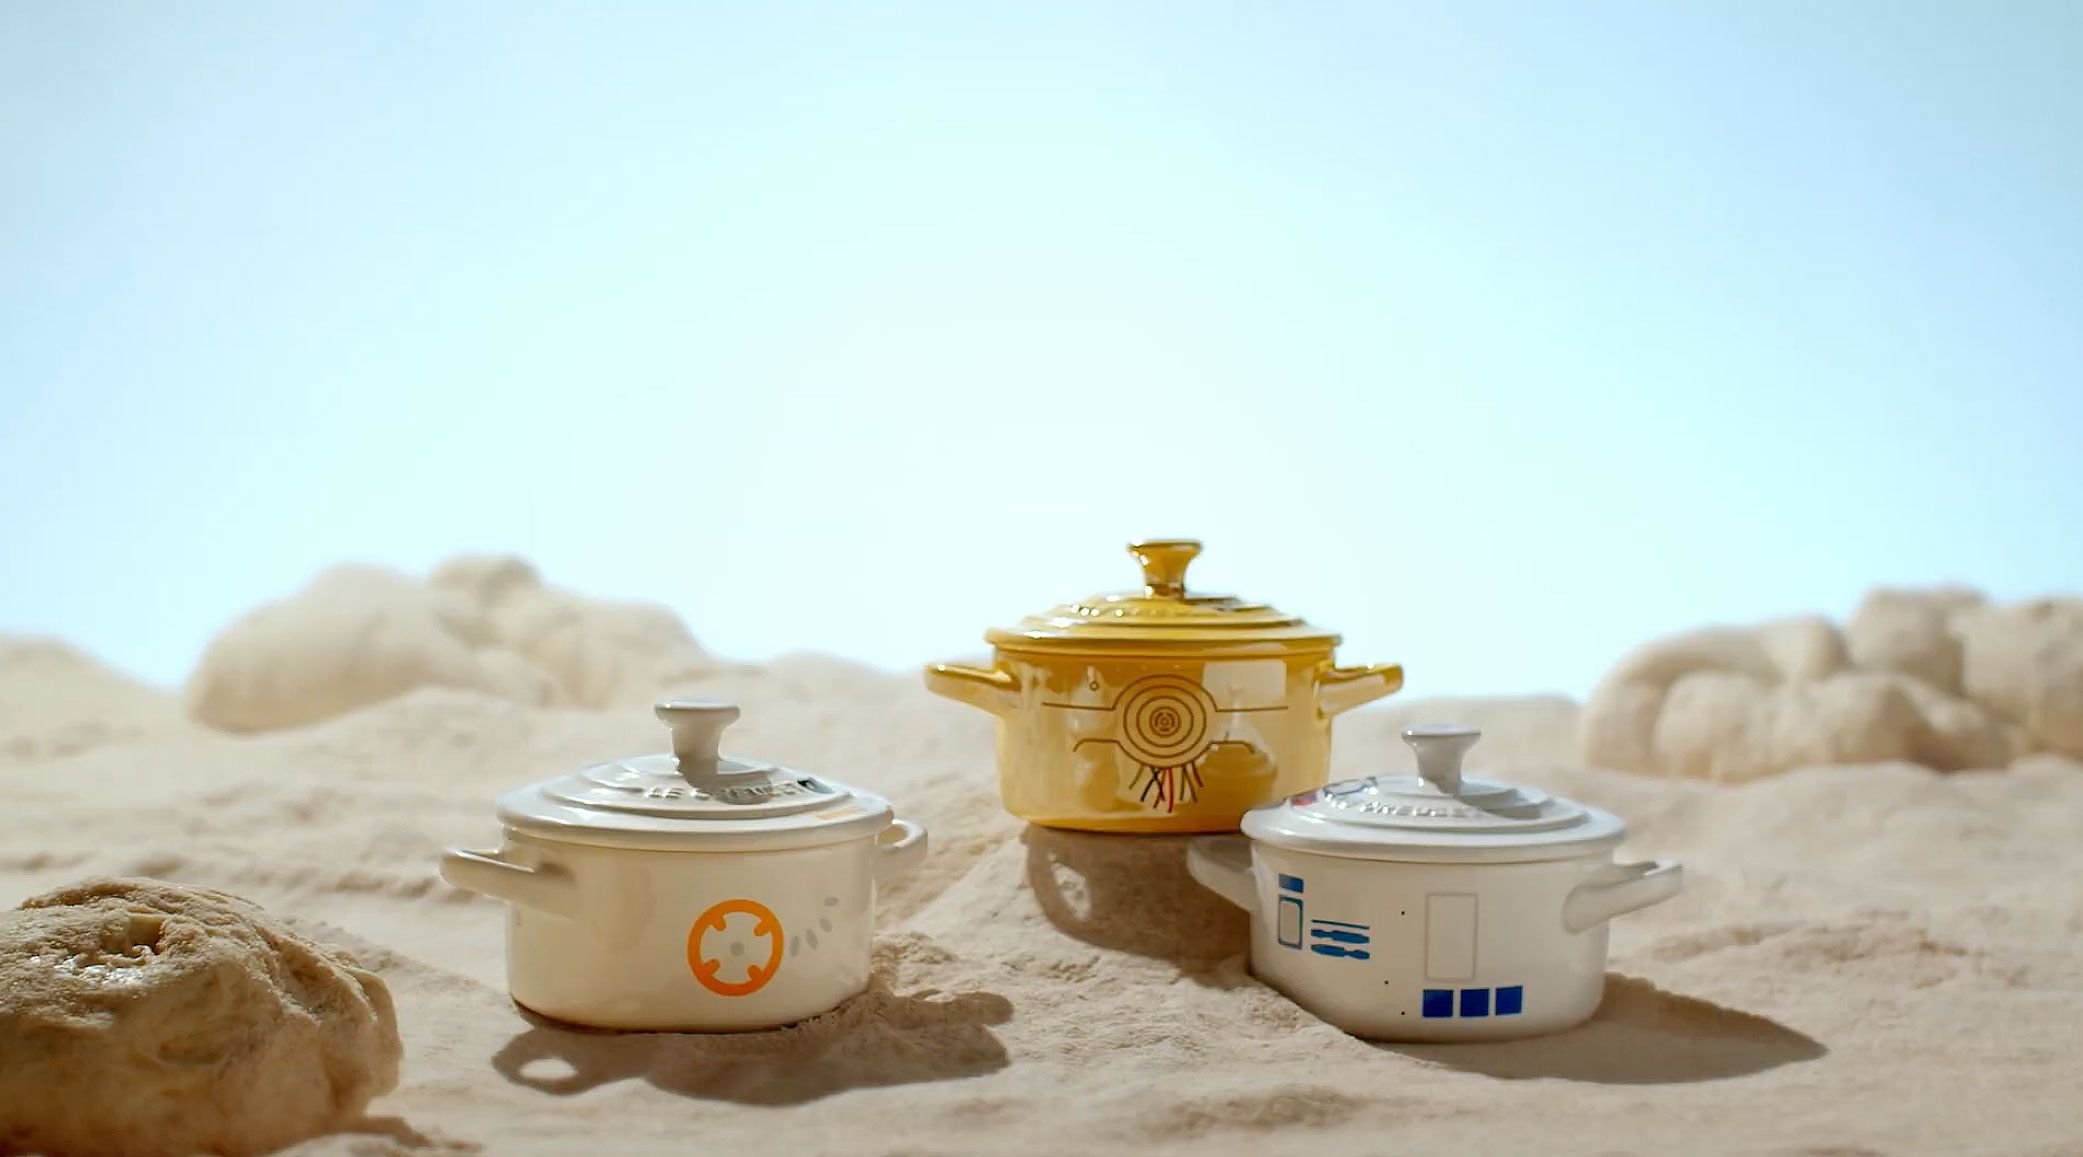 Cookware Brand Le Creuset Made a 'Star Wars'-themed Dutch Oven - Eater